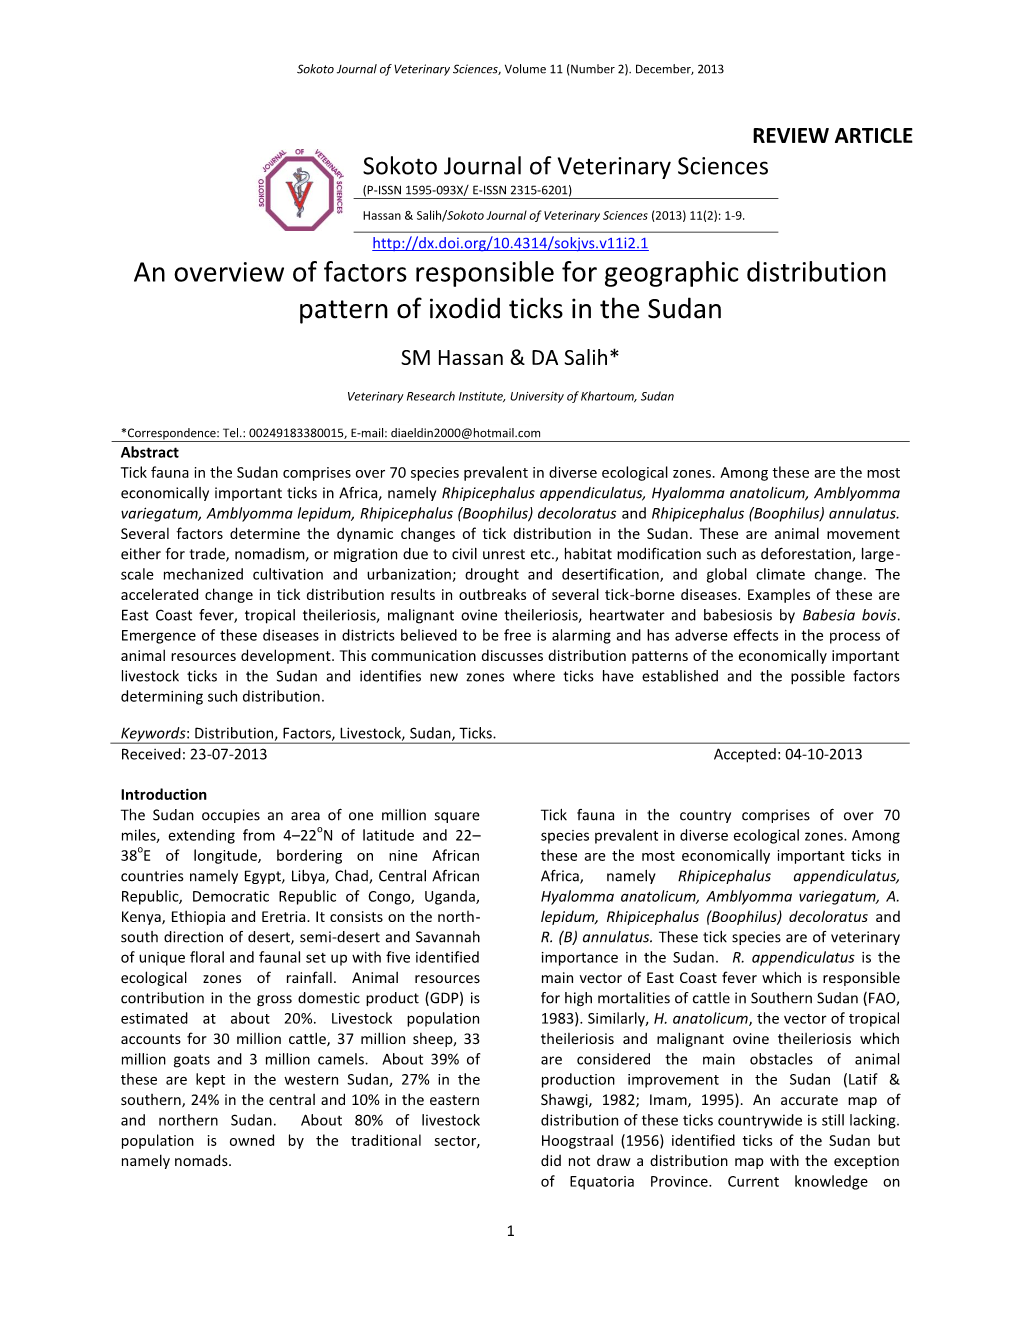 An Overview of Factors Responsible for Geographic Distribution Pattern of Ixodid Ticks in the Sudan SM Hassan & DA Salih*